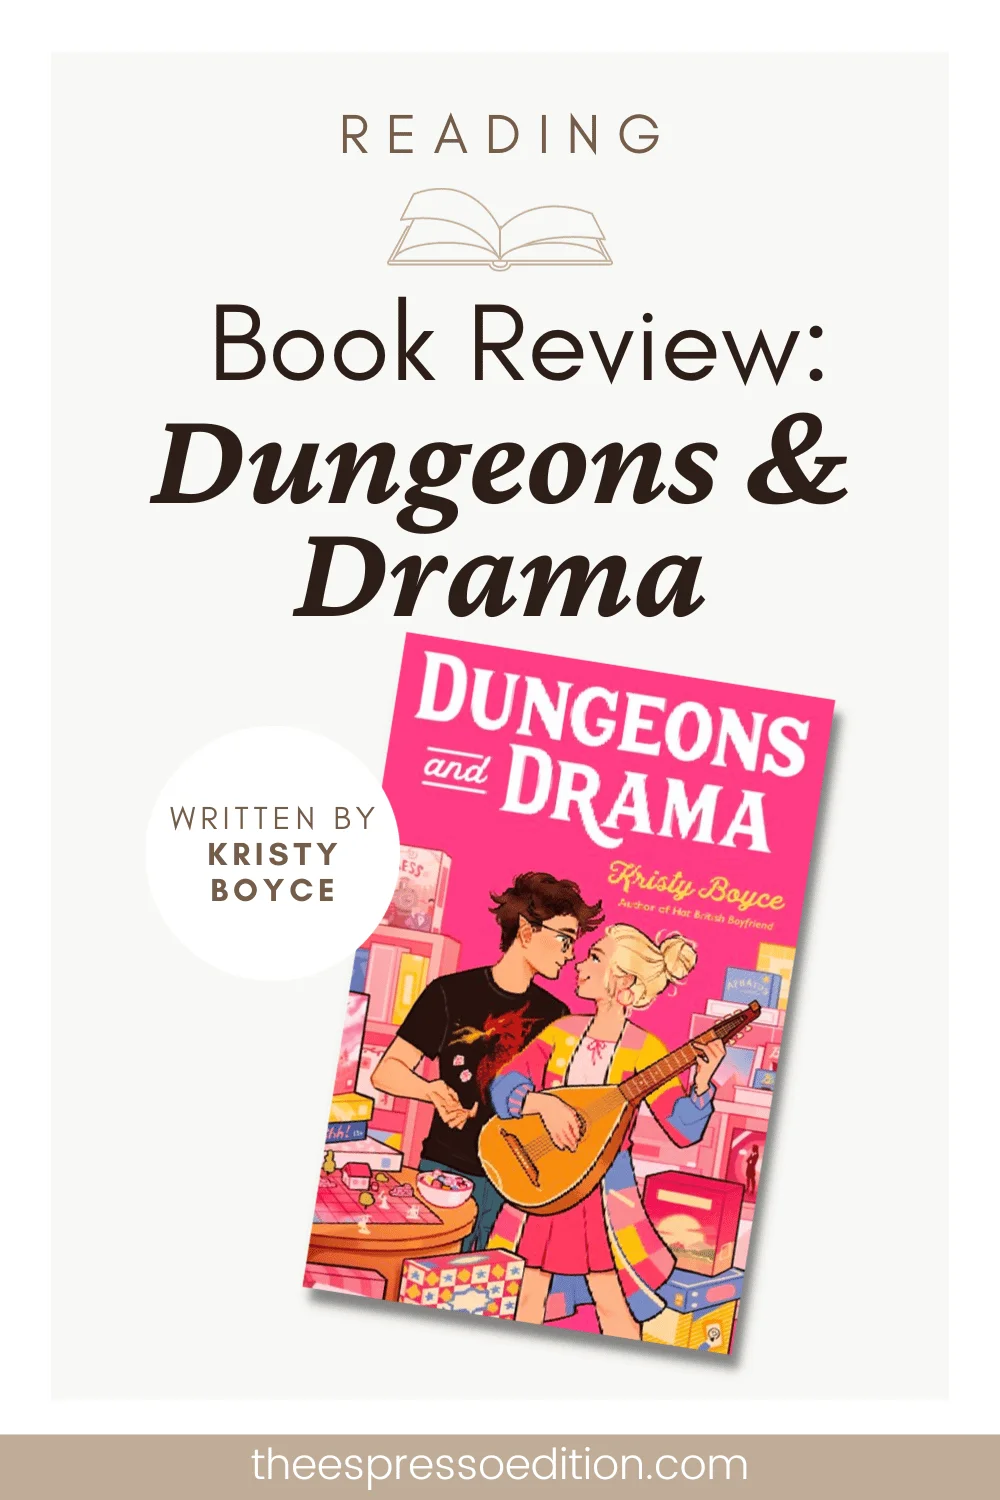 Book Review: Dungeons and Drama by Kristy Boyce by The Espresso Edition cozy bookish blog